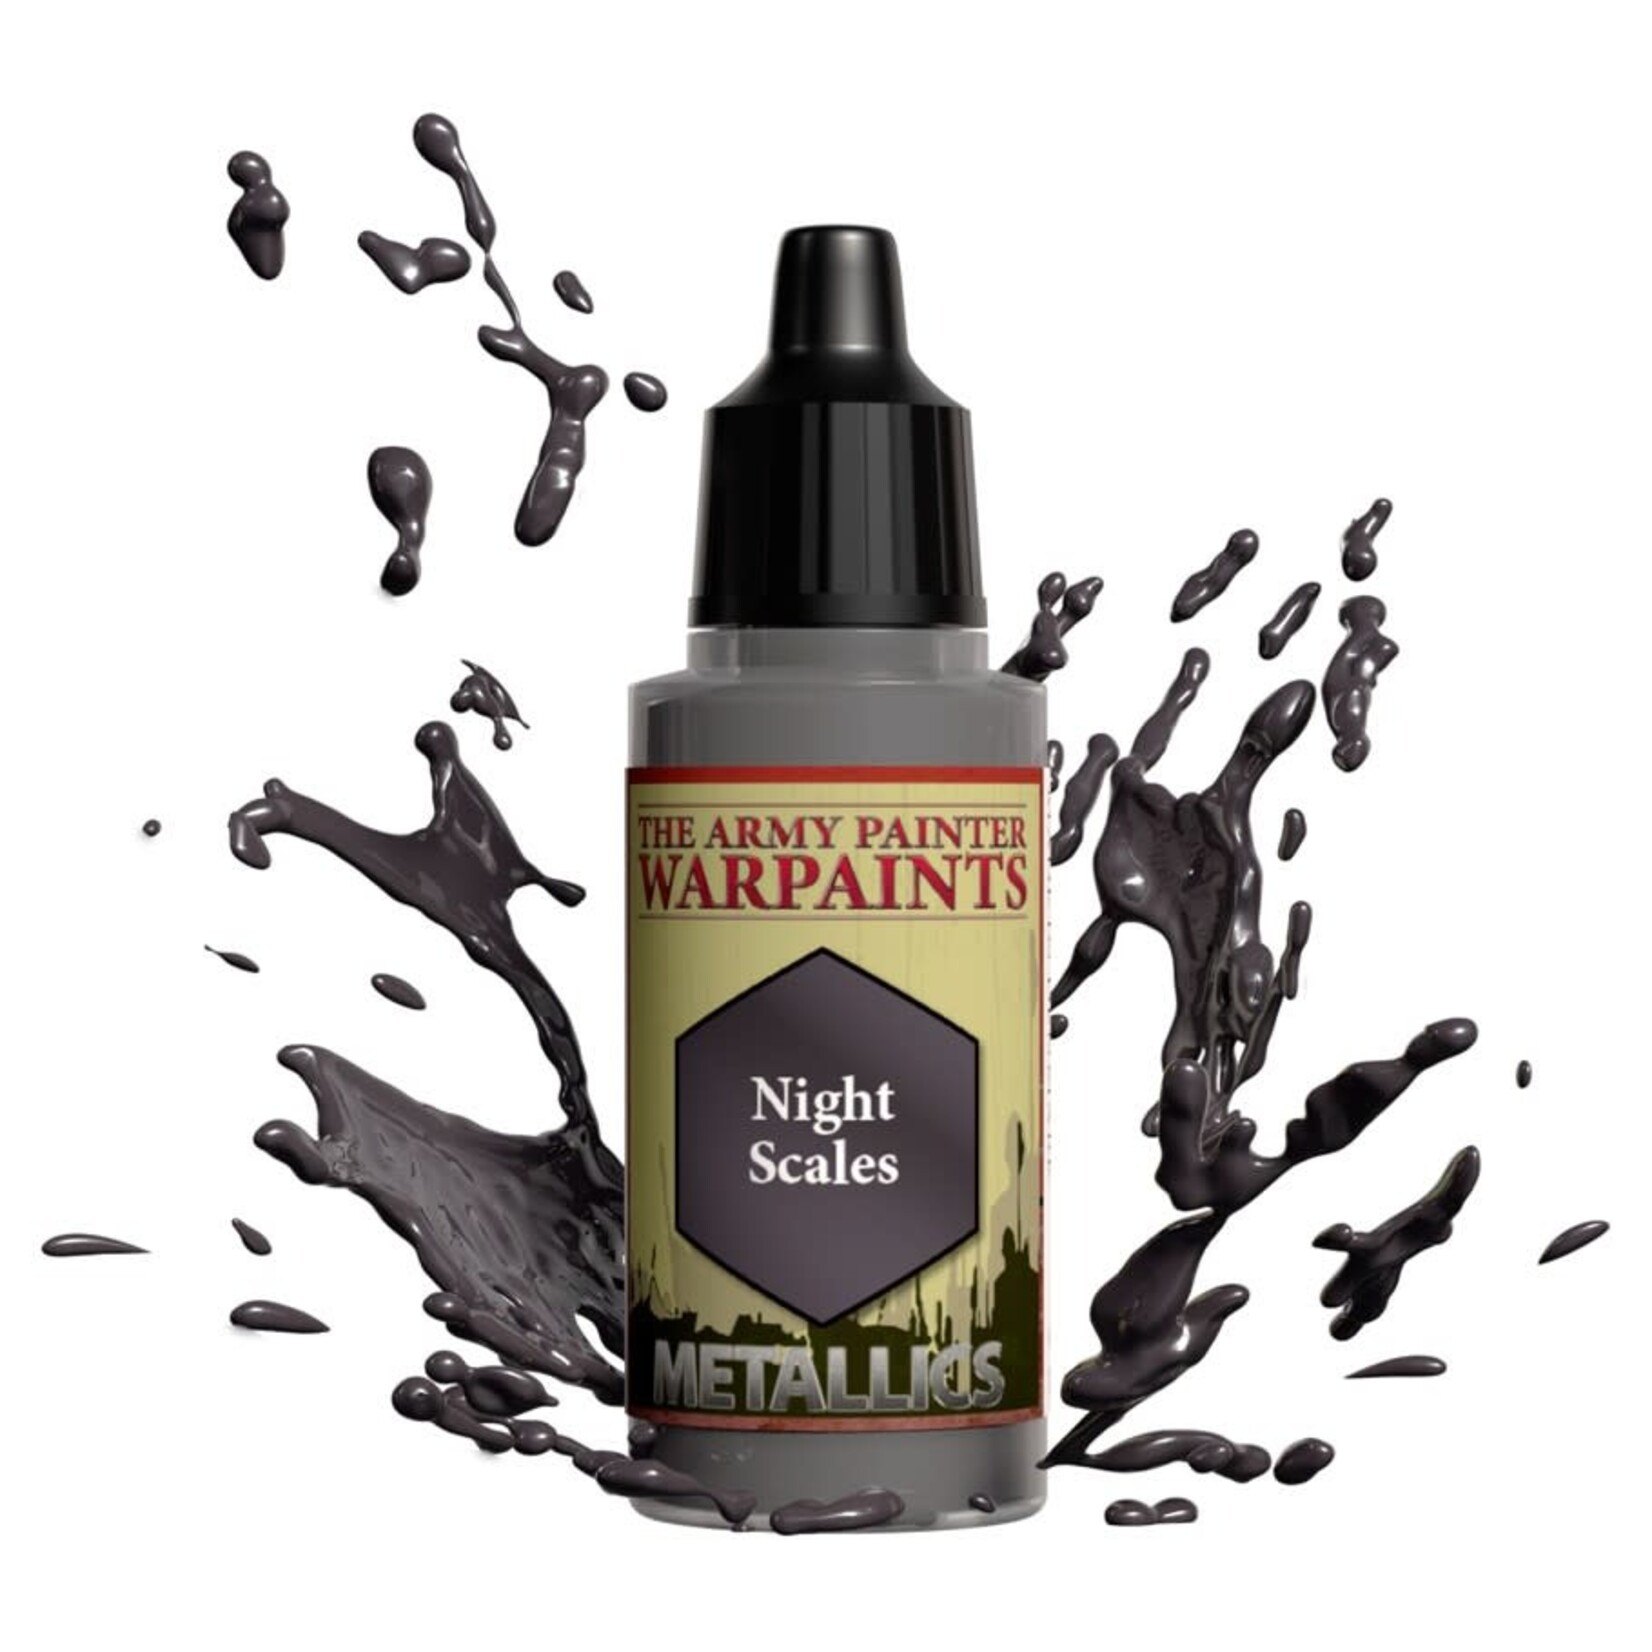 The Army Painter Warpaints: Night Scales 18ml